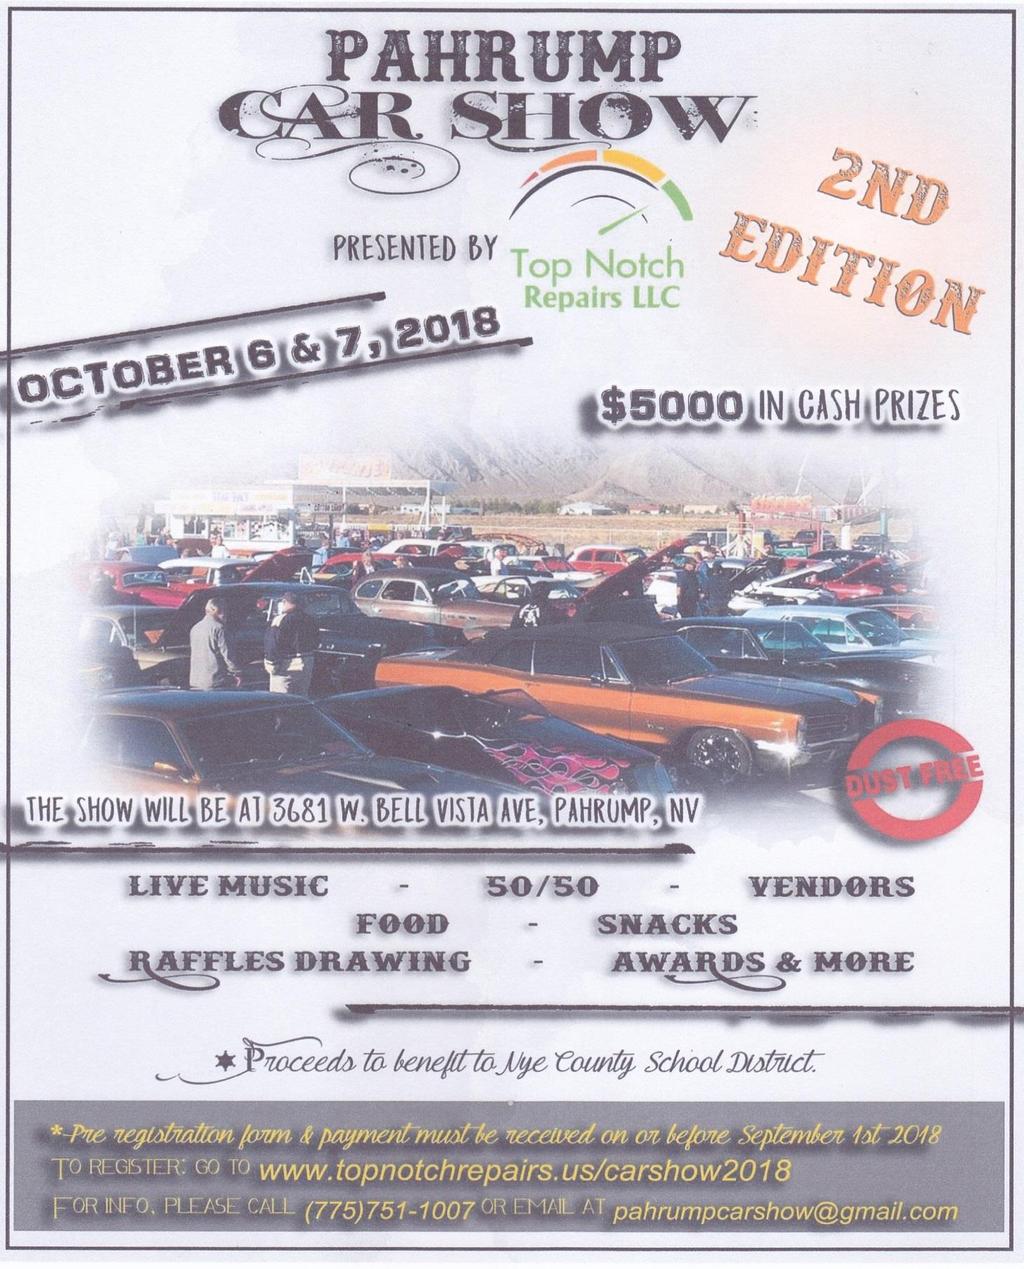 OCTOBER 2018 - SCHEDULE OF EVENTS: 6 th 7 th Pahrump, NV Pahrump Car Show presented by Top Notch Repairs LLC, 3681 W.